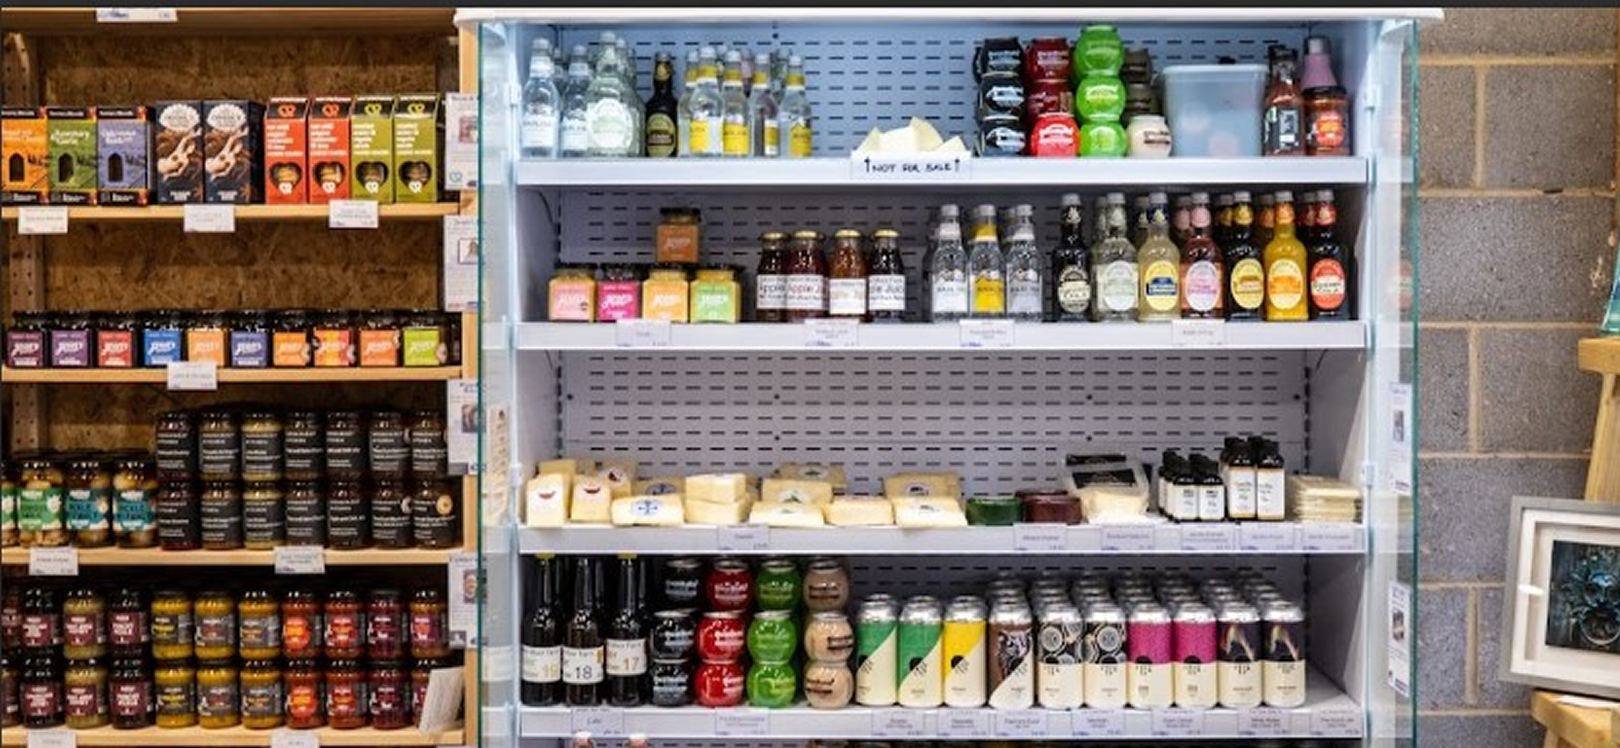 Shelves showing local produce in the shop